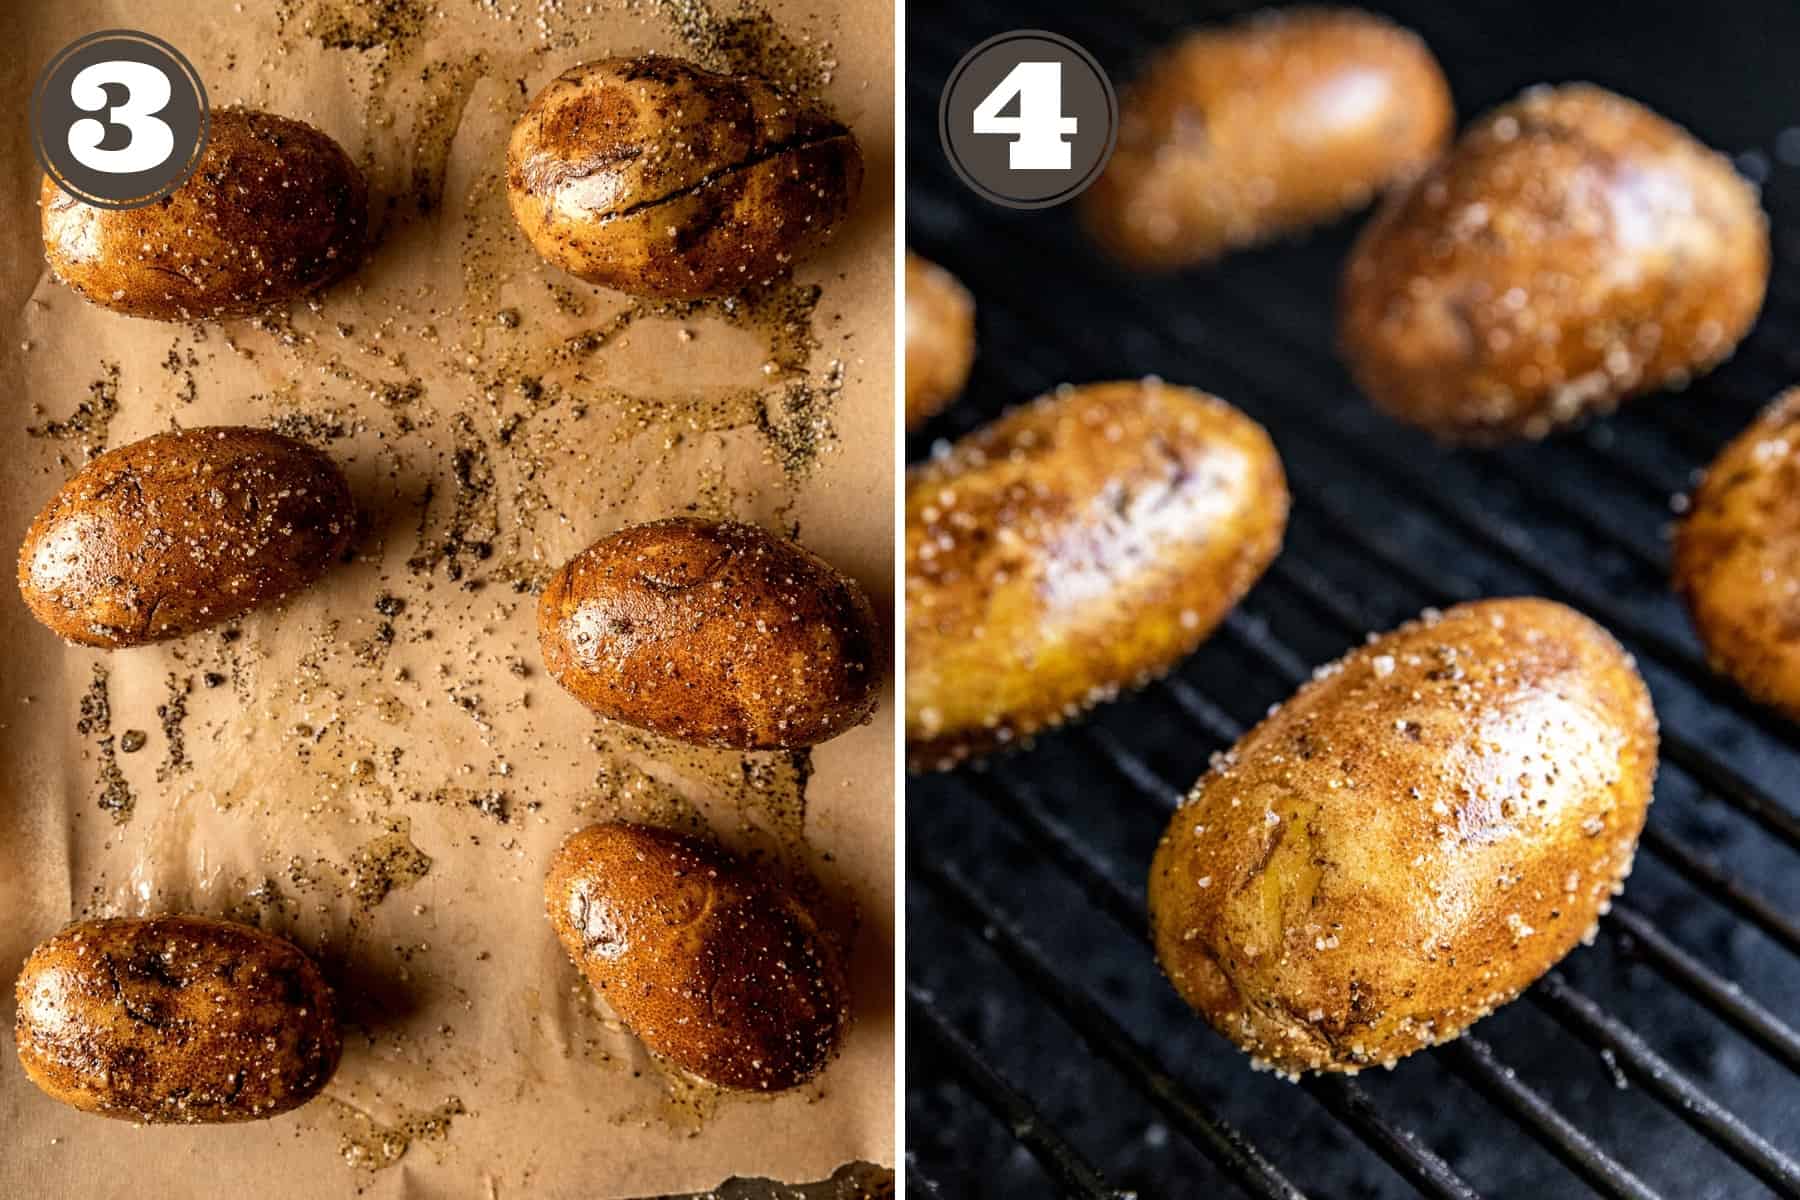 Side by side process shots for baked potatoes inclucing potatoes rubbed with oil and placed on grill grates.